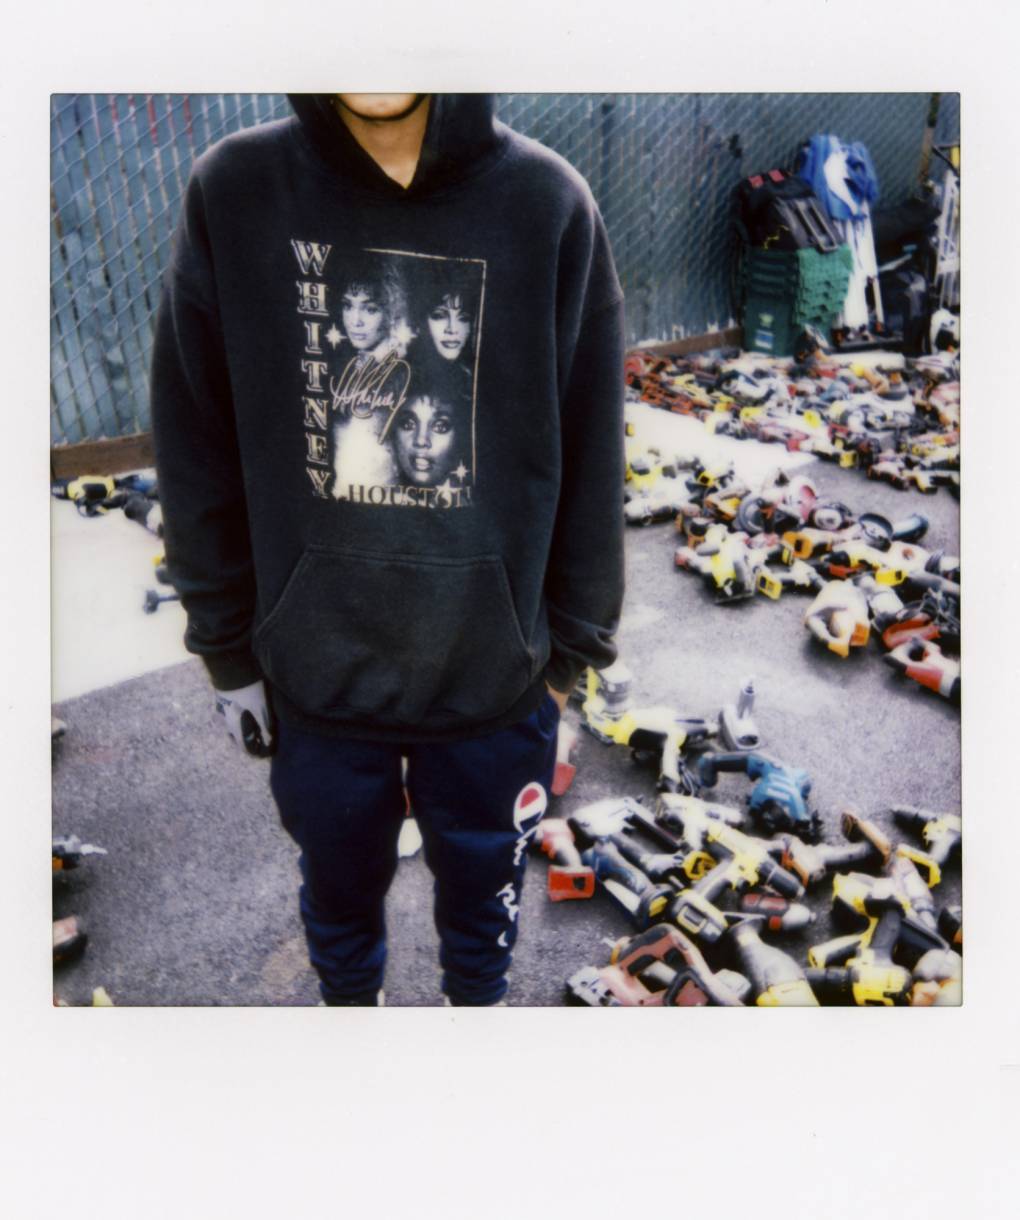 A person wears a Whitney Houston sweatshirt while standing beside an array of power tools in an outdoor setting.